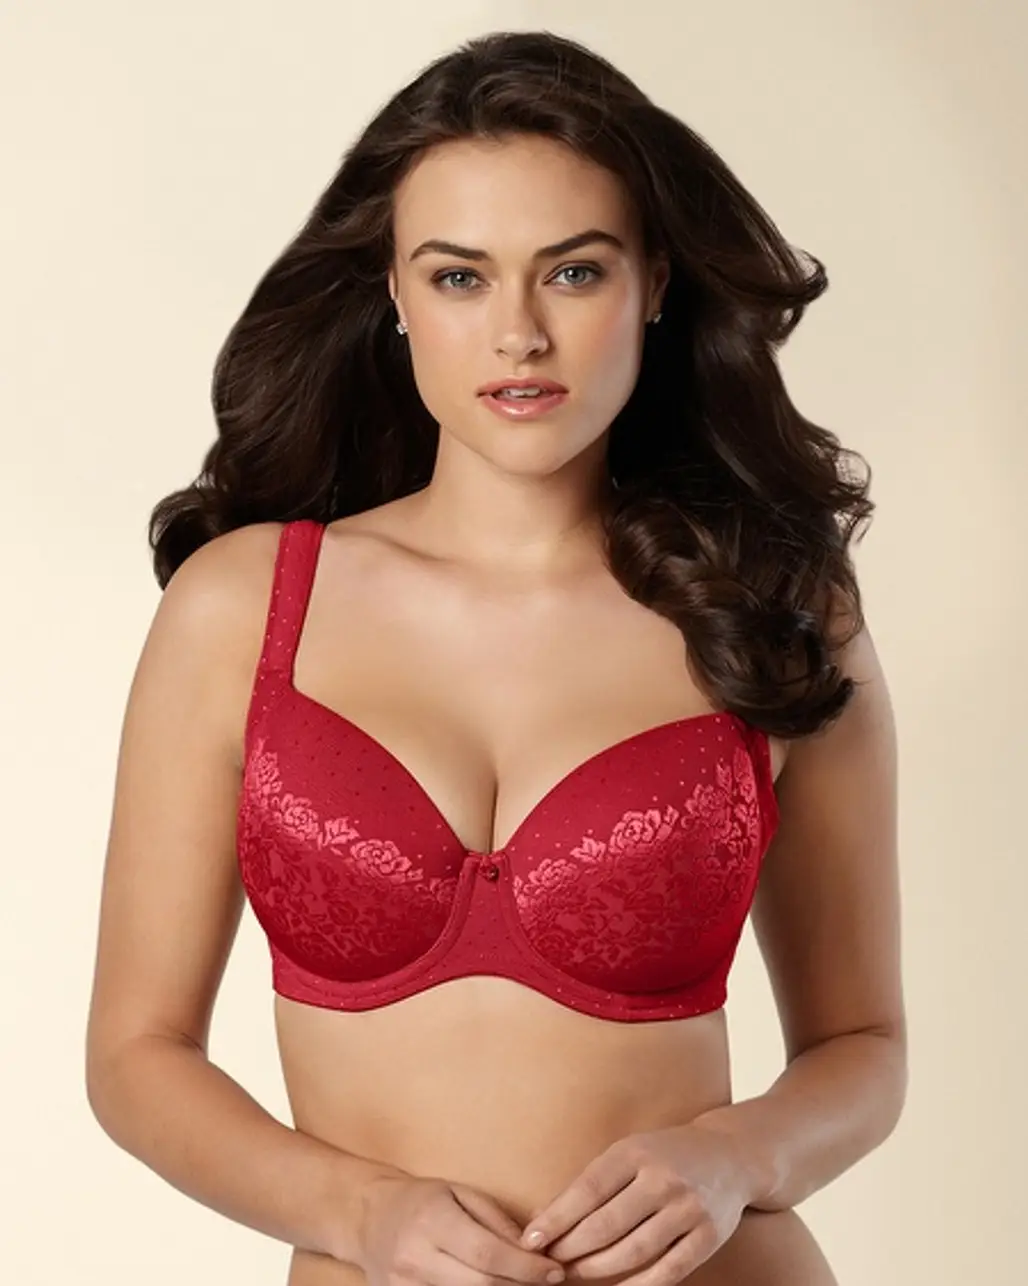 7 Hottest Bras That You Would Love To Show Off! 